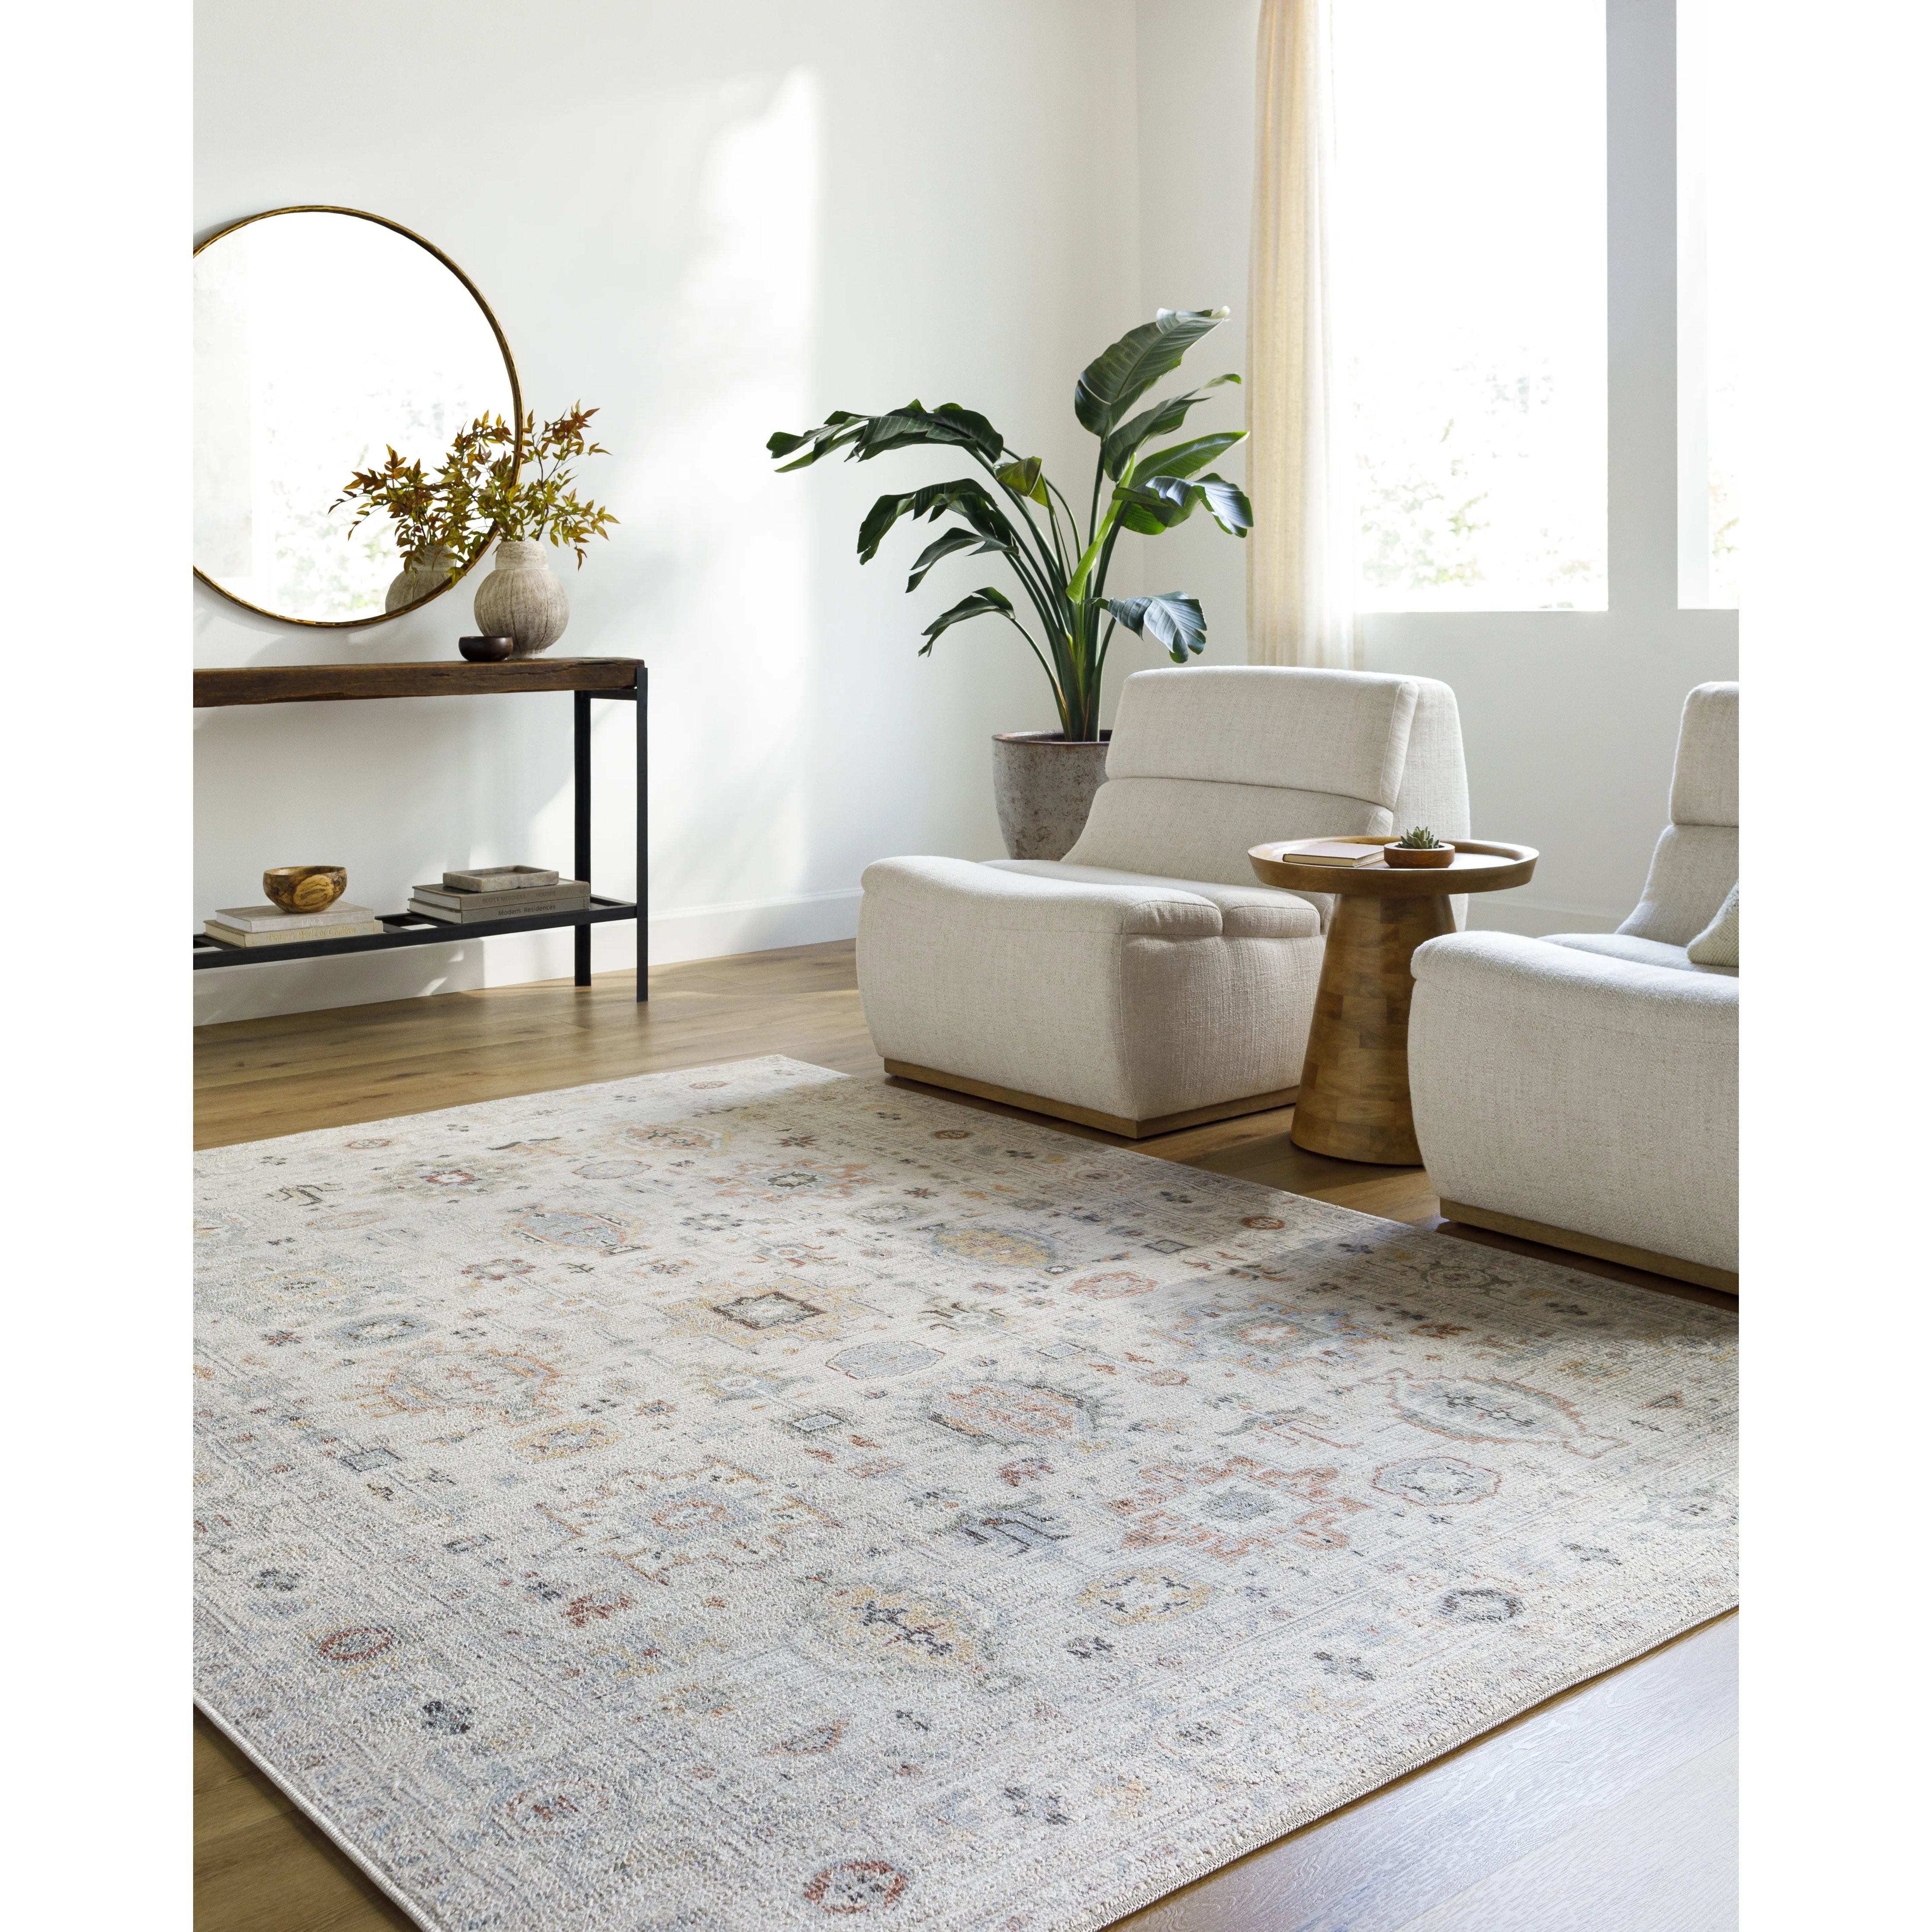 PNW Home x Surya available at Amethyst Home shipping to Australia, UK, and Canada. Organic modern design with easy to clean rugs for a family home in  the Seattle metro area.